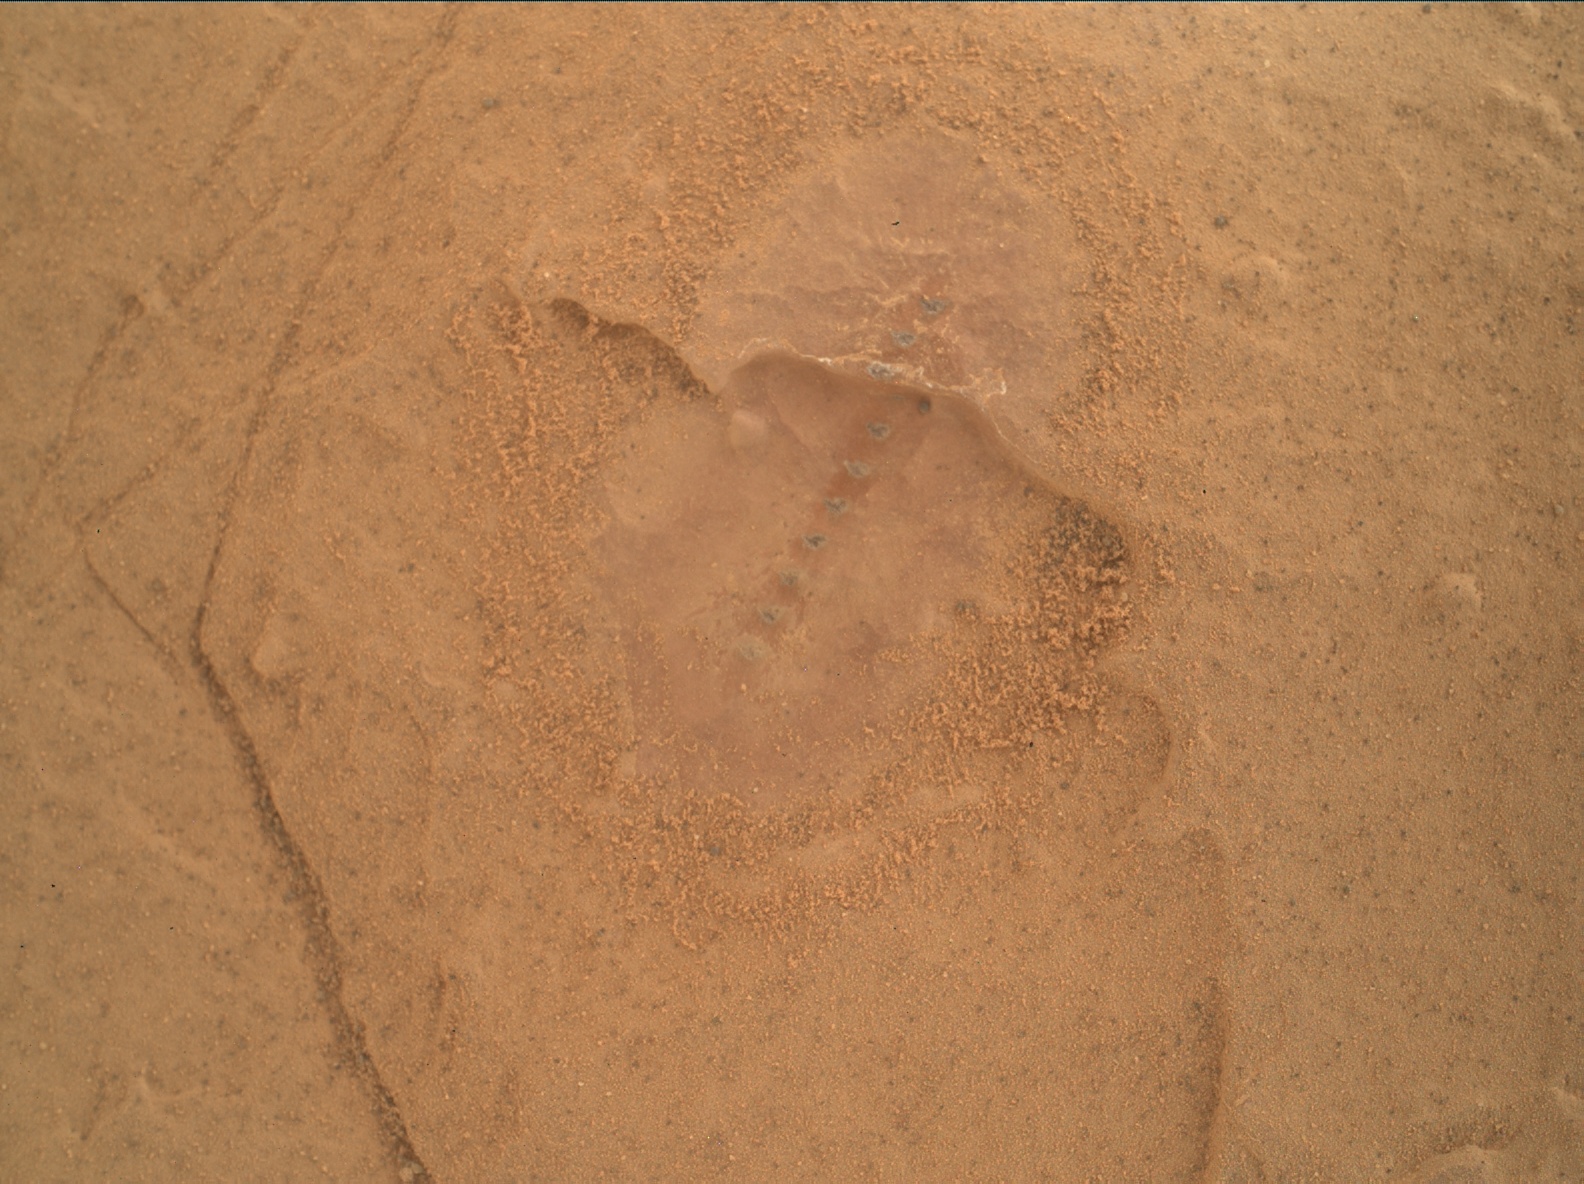 Nasa's Mars rover Curiosity acquired this image using its Mars Hand Lens Imager (MAHLI) on Sol 1834